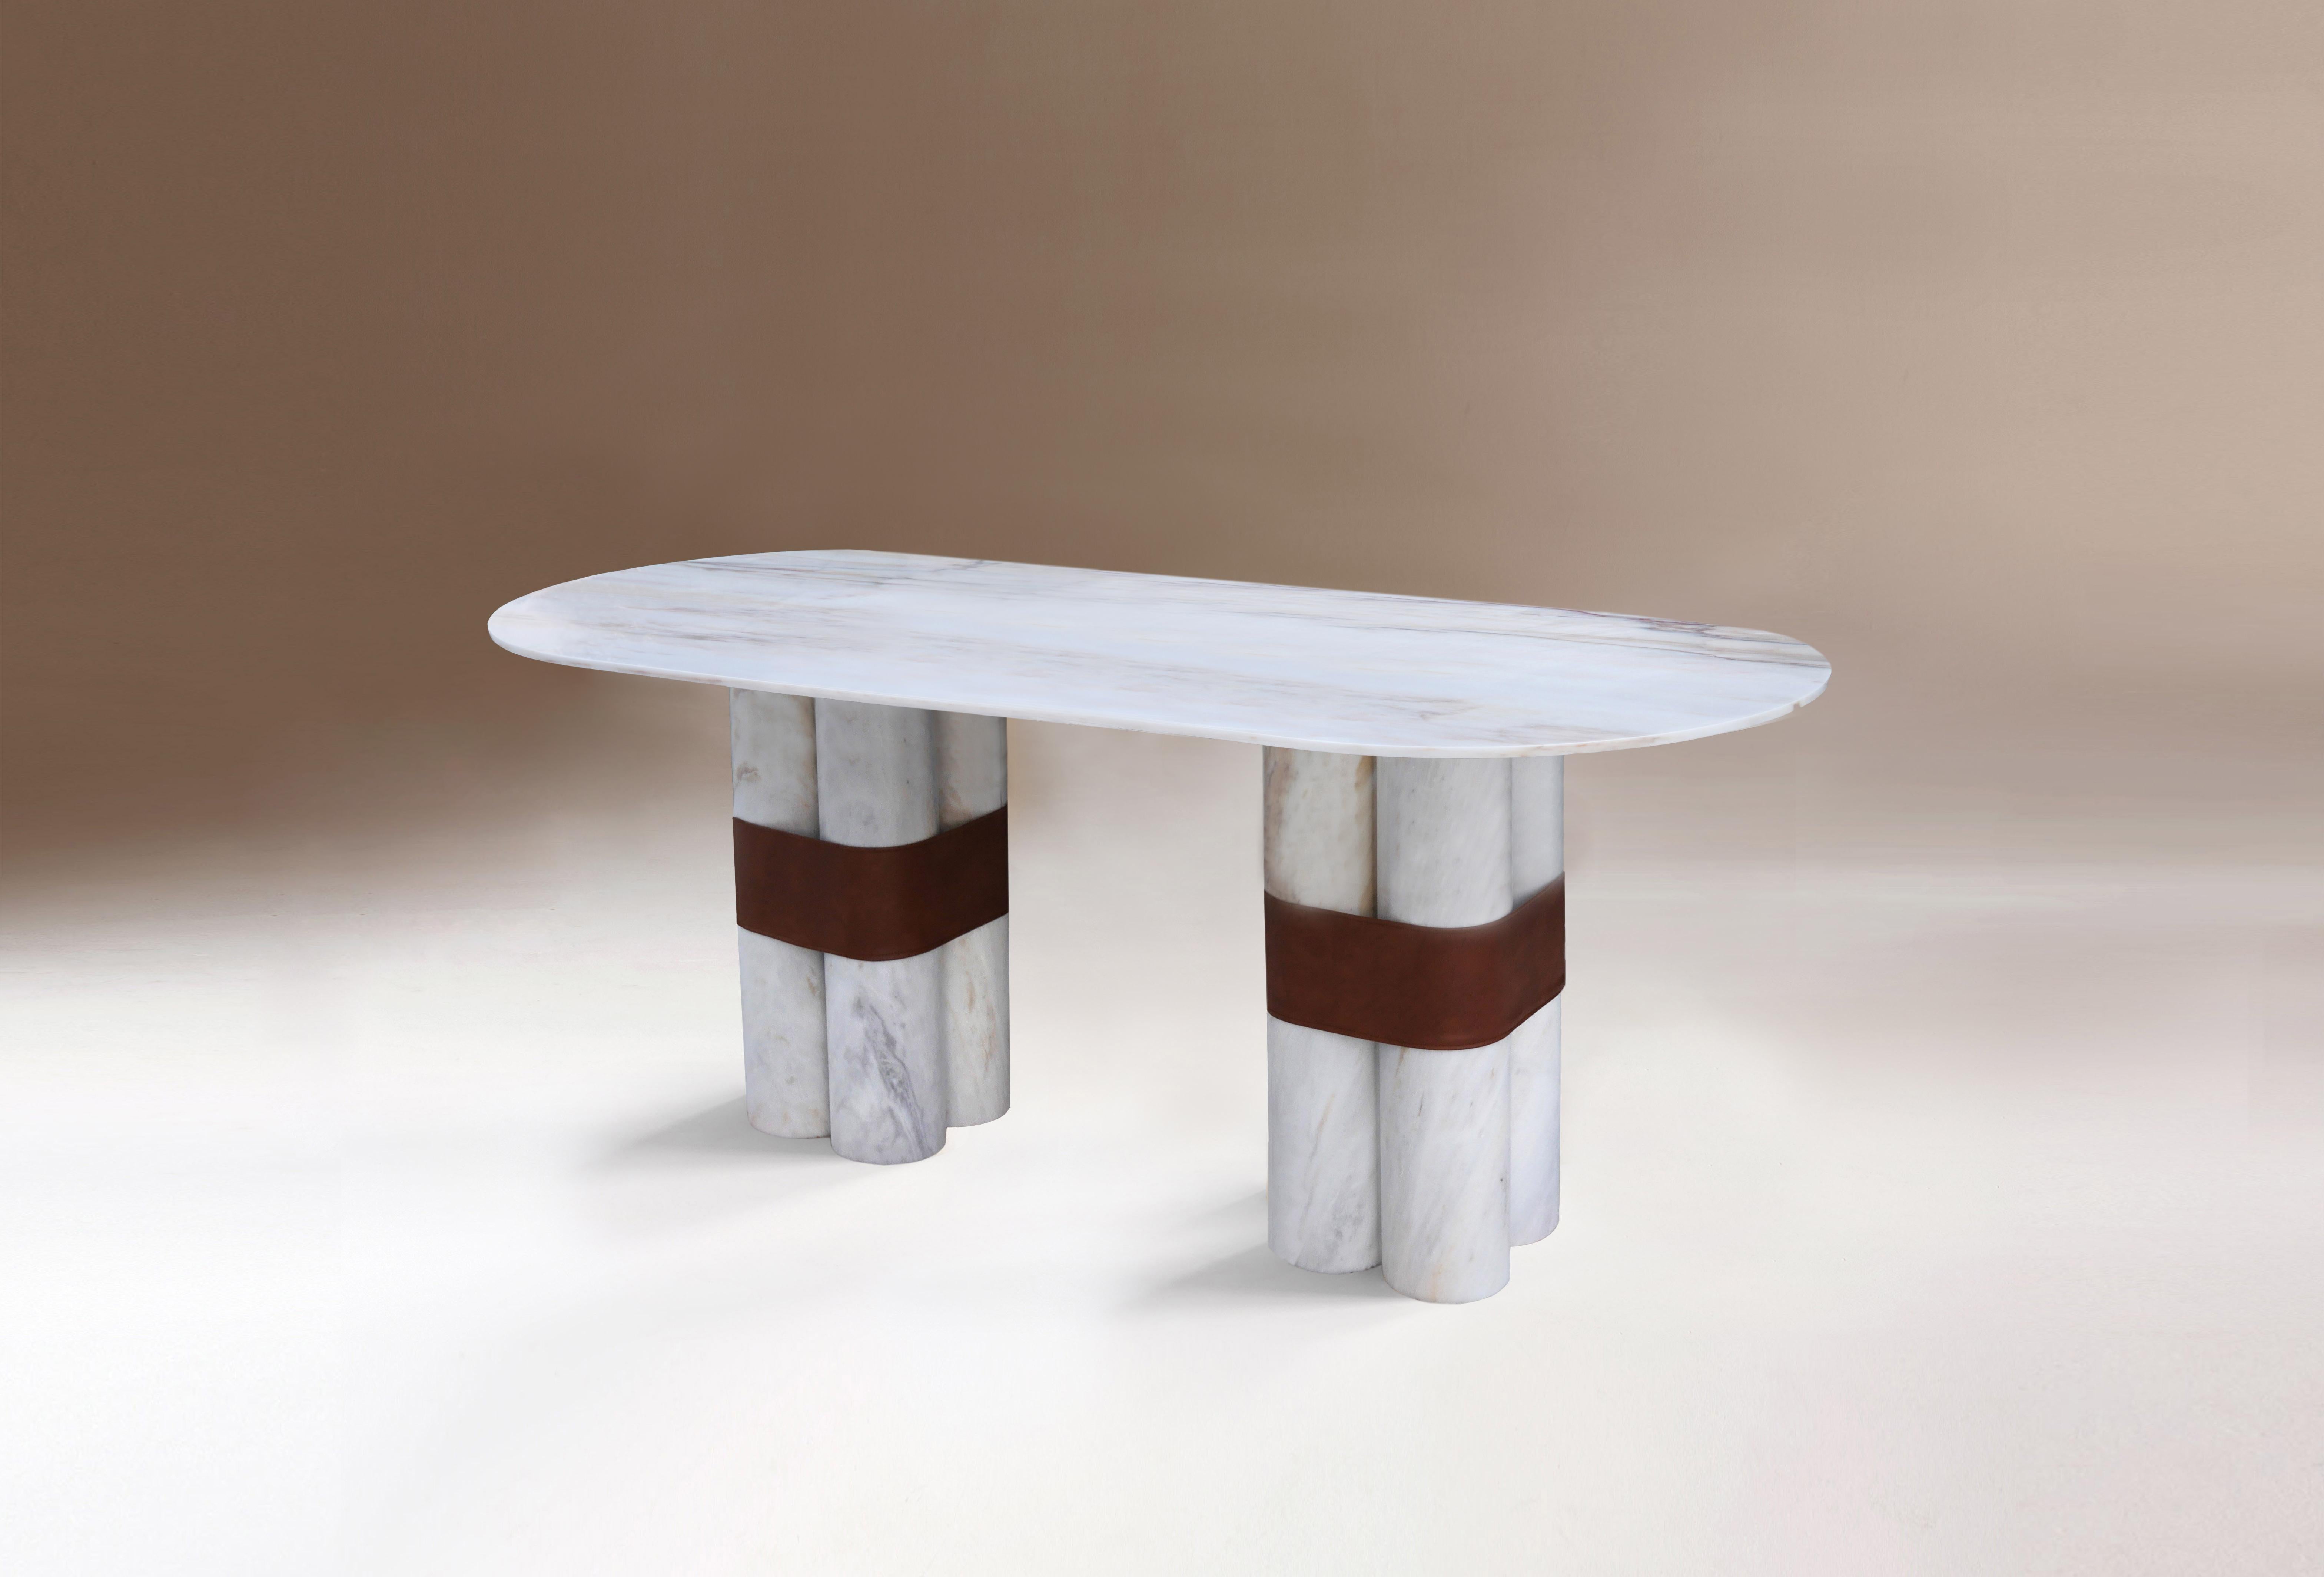 Axis is a full marble table. Its base formed by two thin blocks resembling round columns and its round top create an almost architectural balance. It also has a final and unexpected touch thanks to the handmade eco leather belt that embrace the